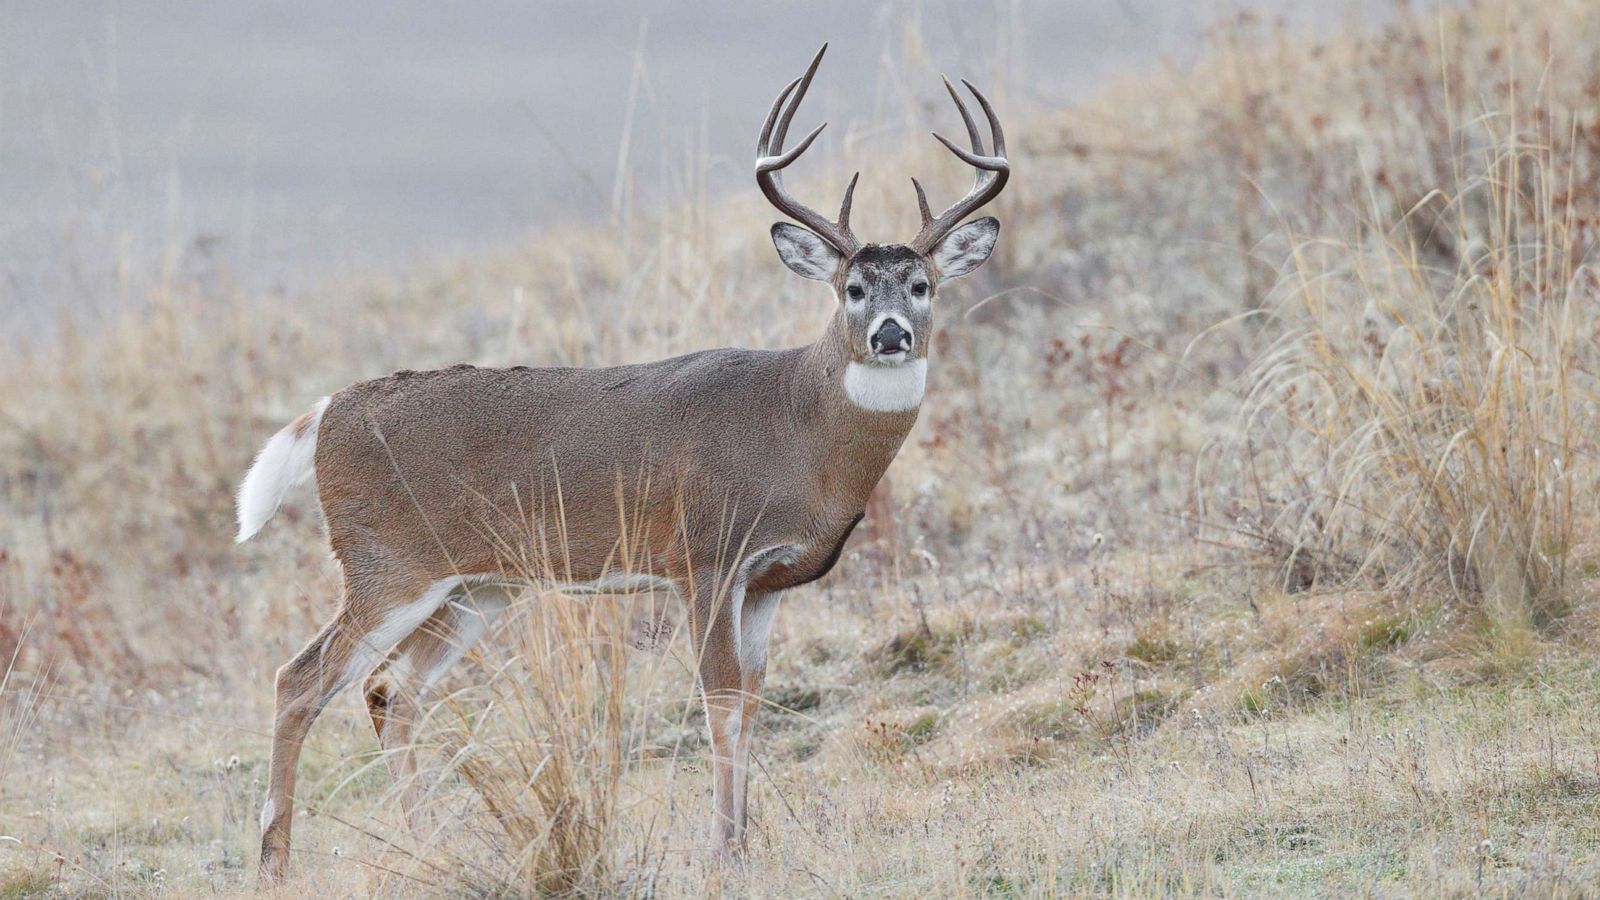 Arkansas hunter dies after being attacked by deer he thought was dead - ABC News